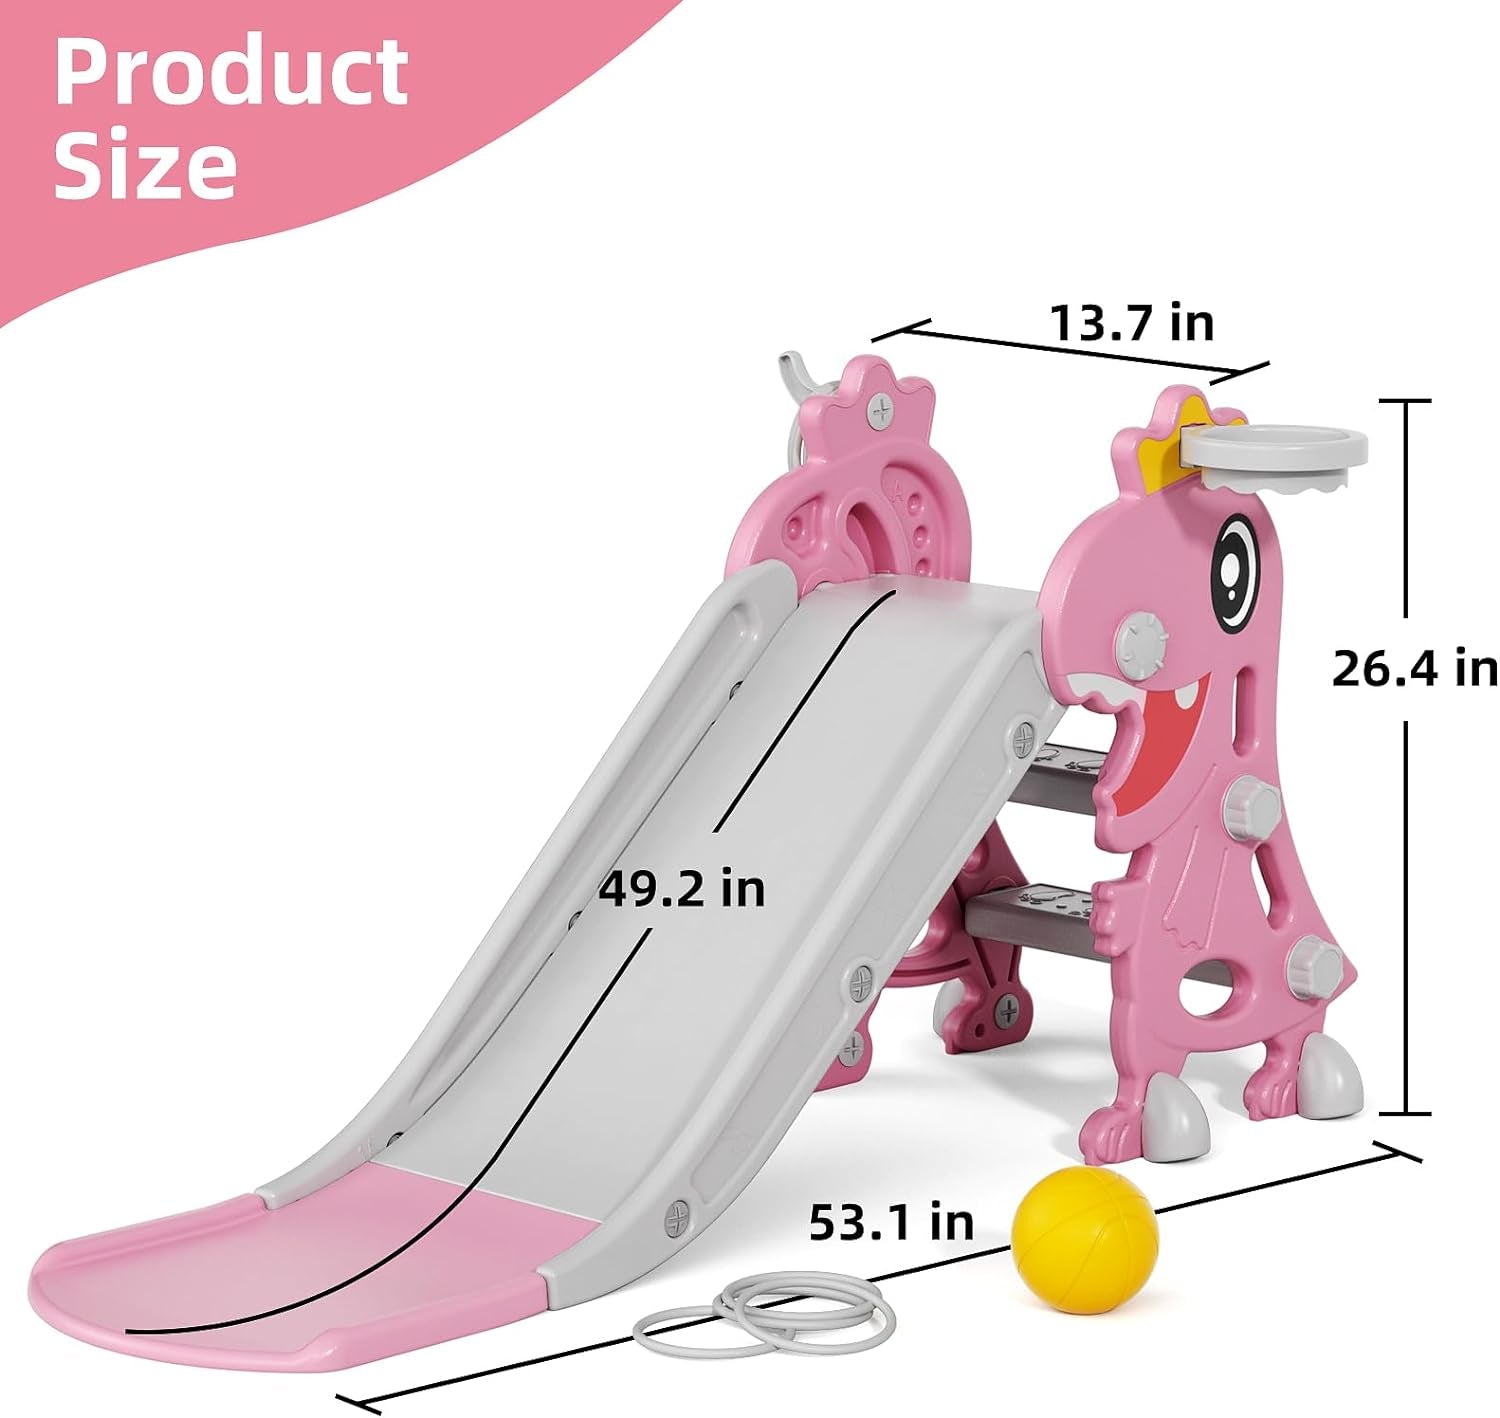 Toddler Slide, 4 in 1 Foldable Indoor Slide for Toddlers Age 1-3, Indoor and Outdoor Playground, Toddler Climber Playset with Basketball Hoop and Ring Toss (Pink)